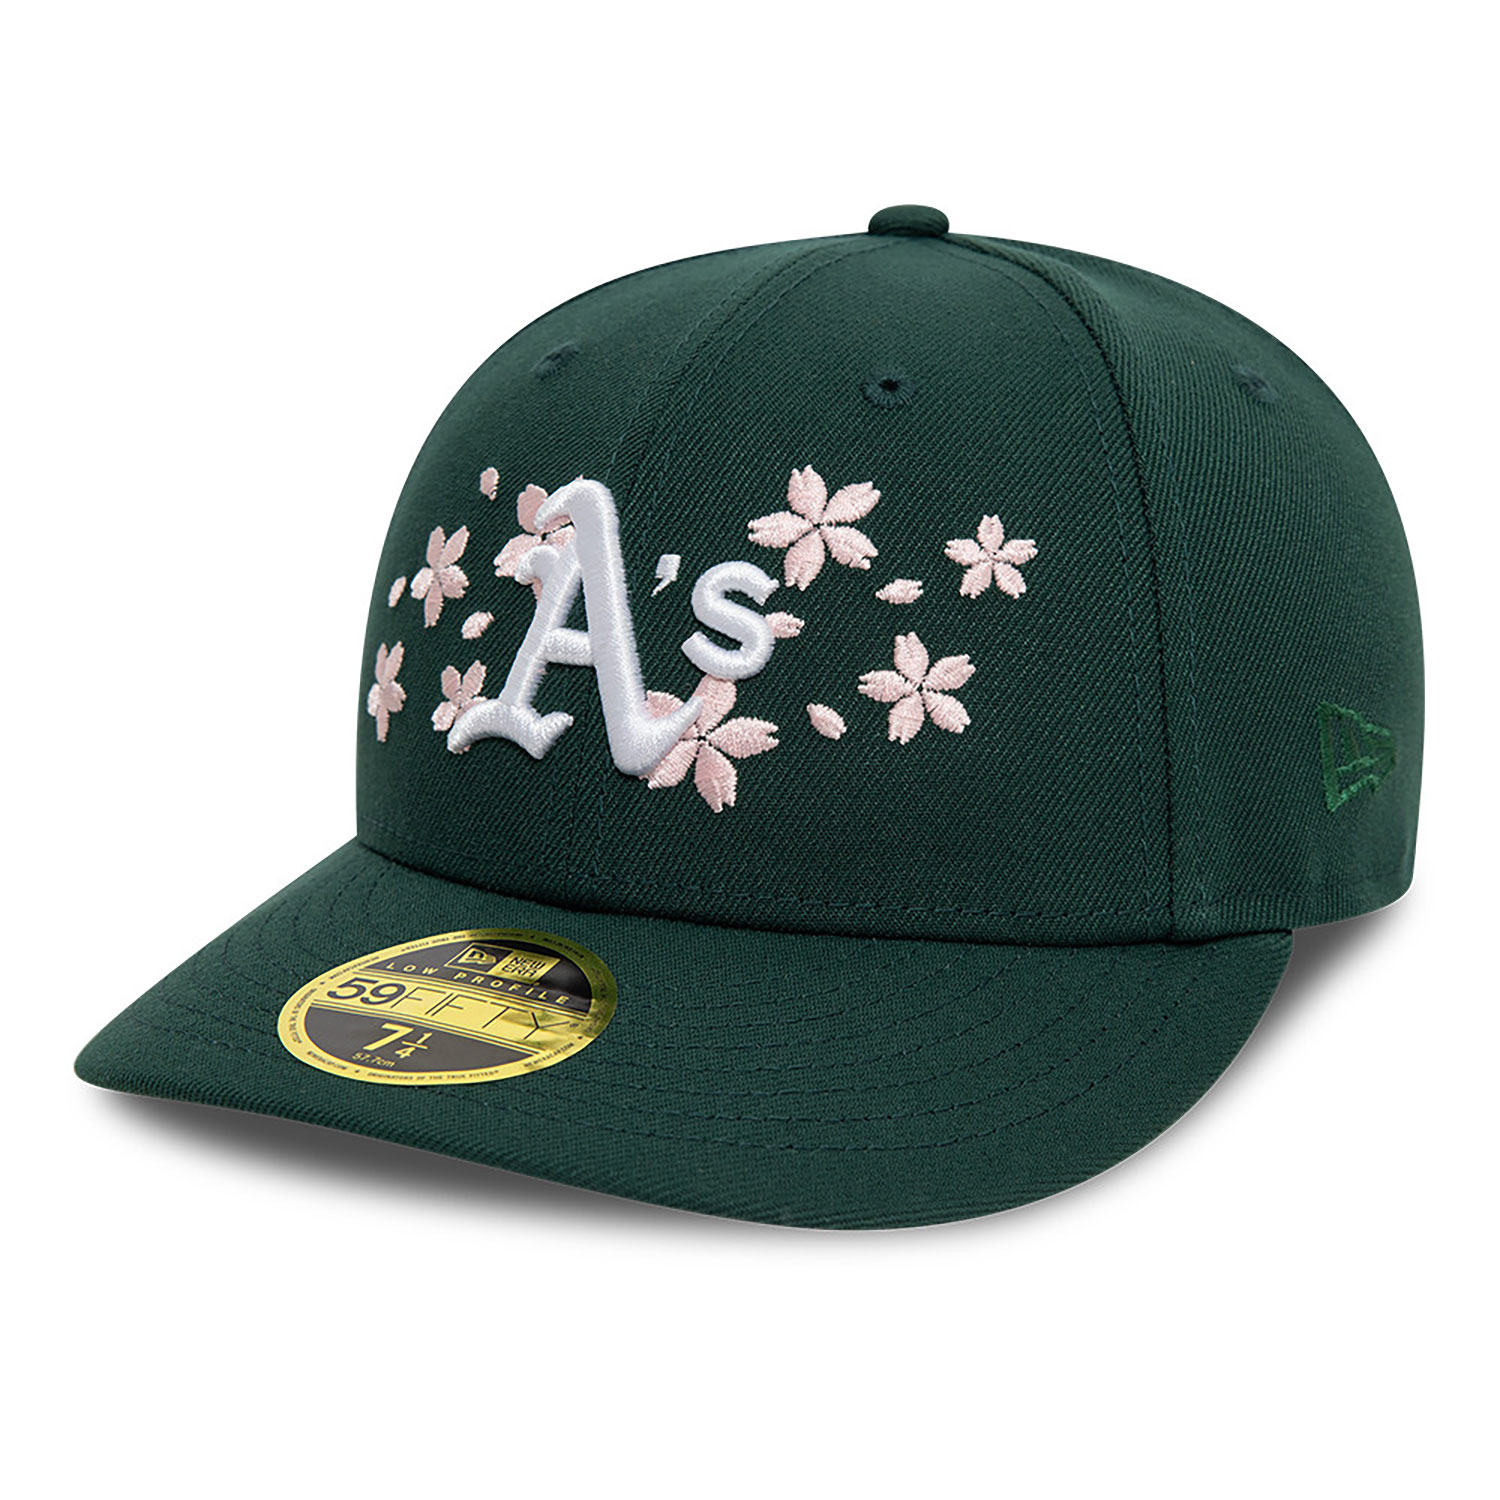 Oakland Athletics Cherry Blossom 59FIFTY Fitted Hat – New Era Cap